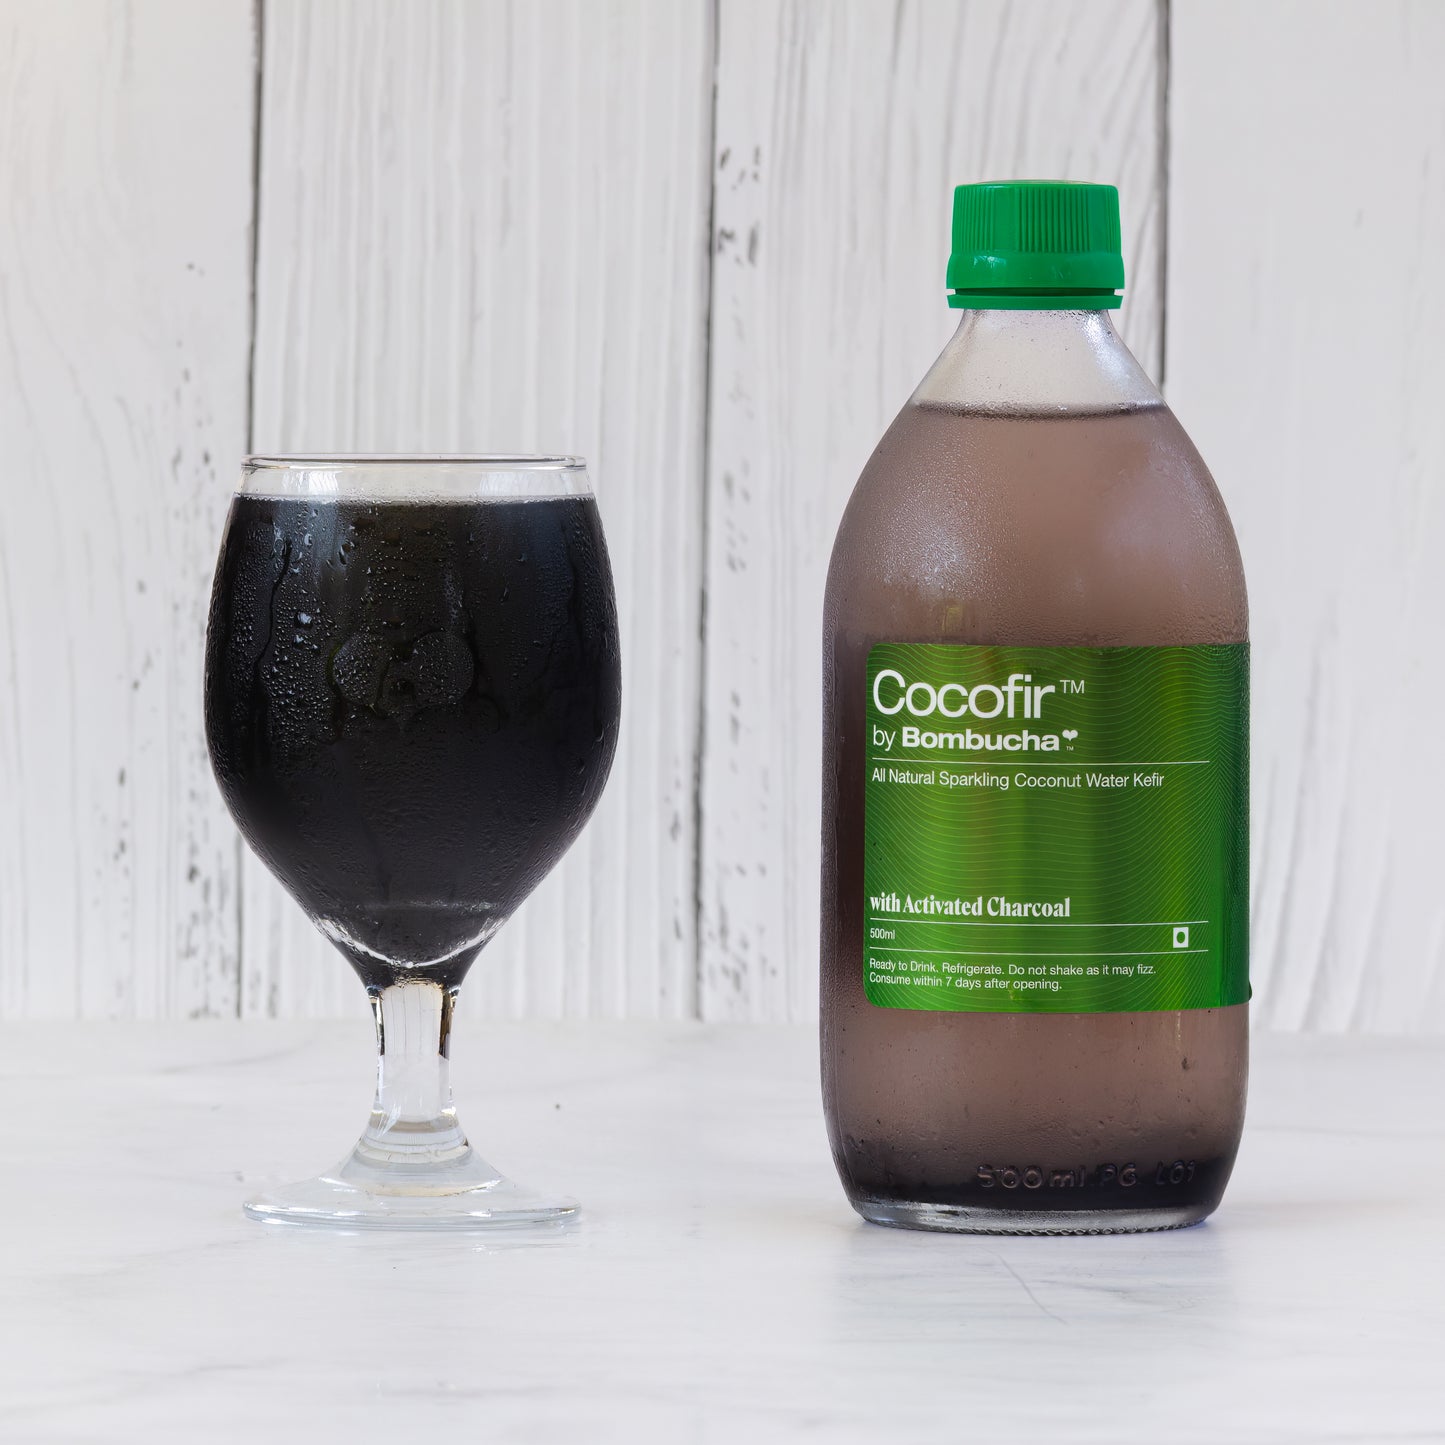 Coconut water Kefir with Activated Charcoal